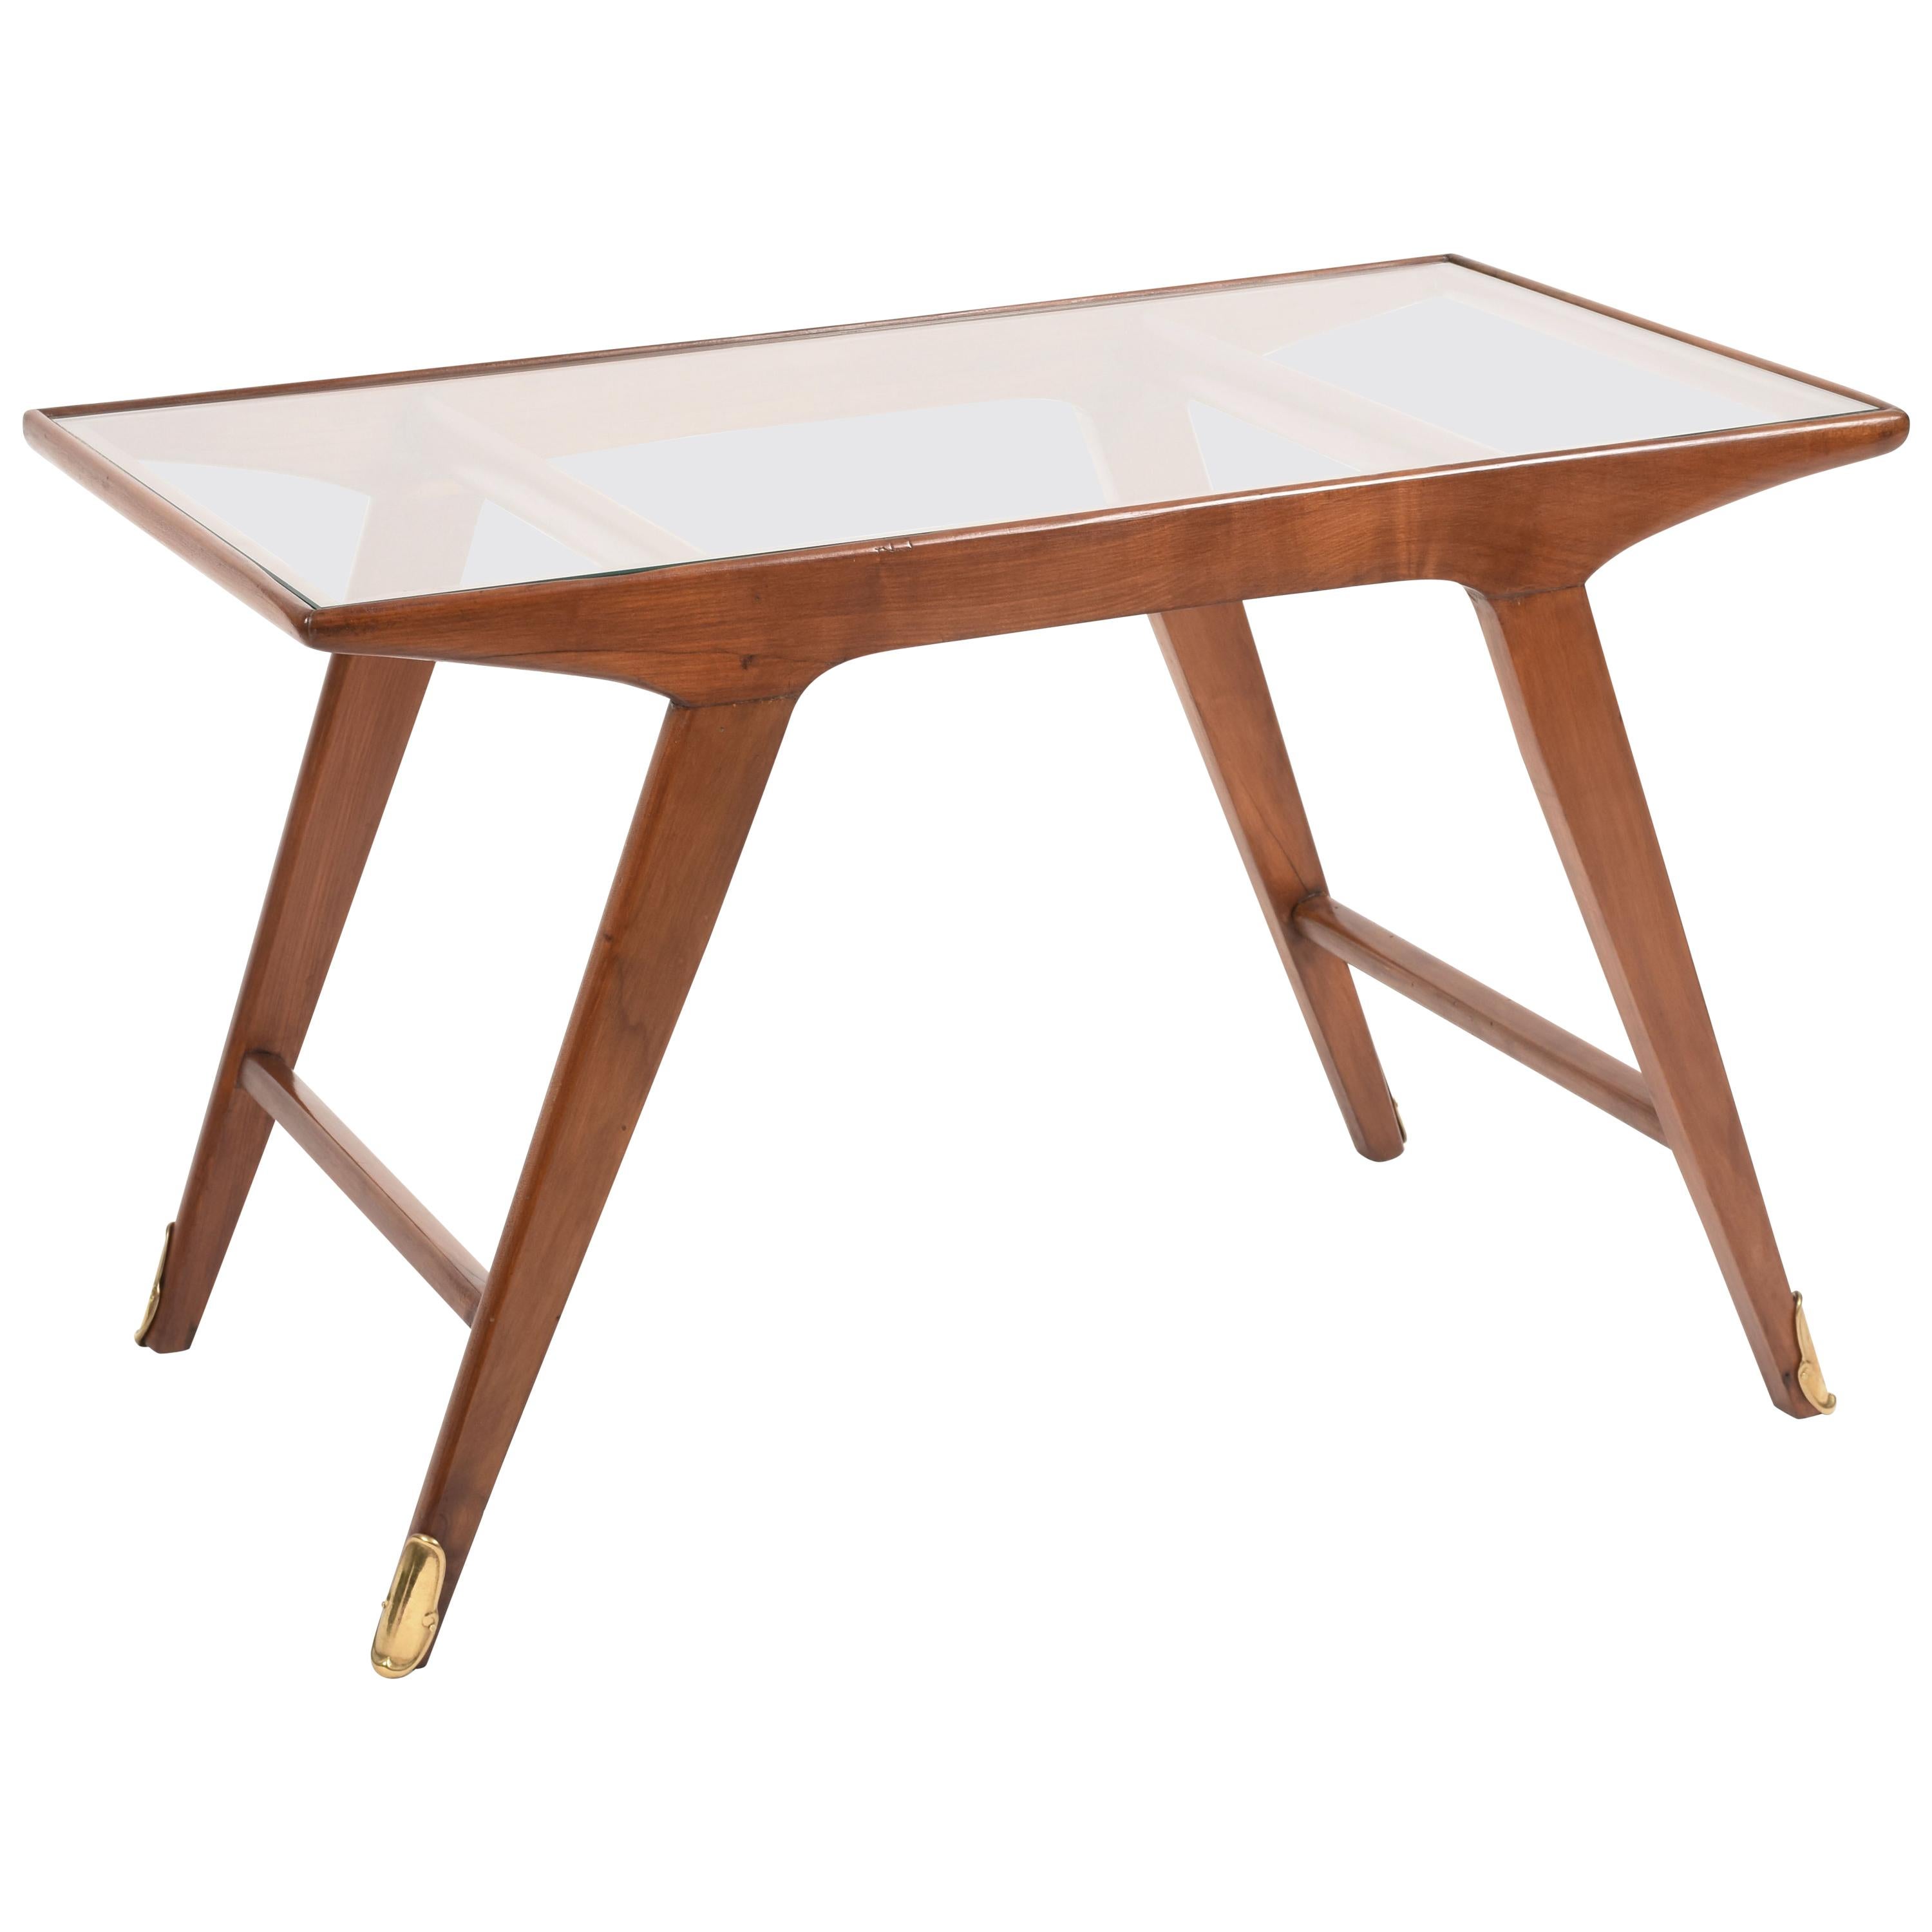 Cesare Lacca Midcentury Italian Cherrywood and Brass Coffee Table, 1950s